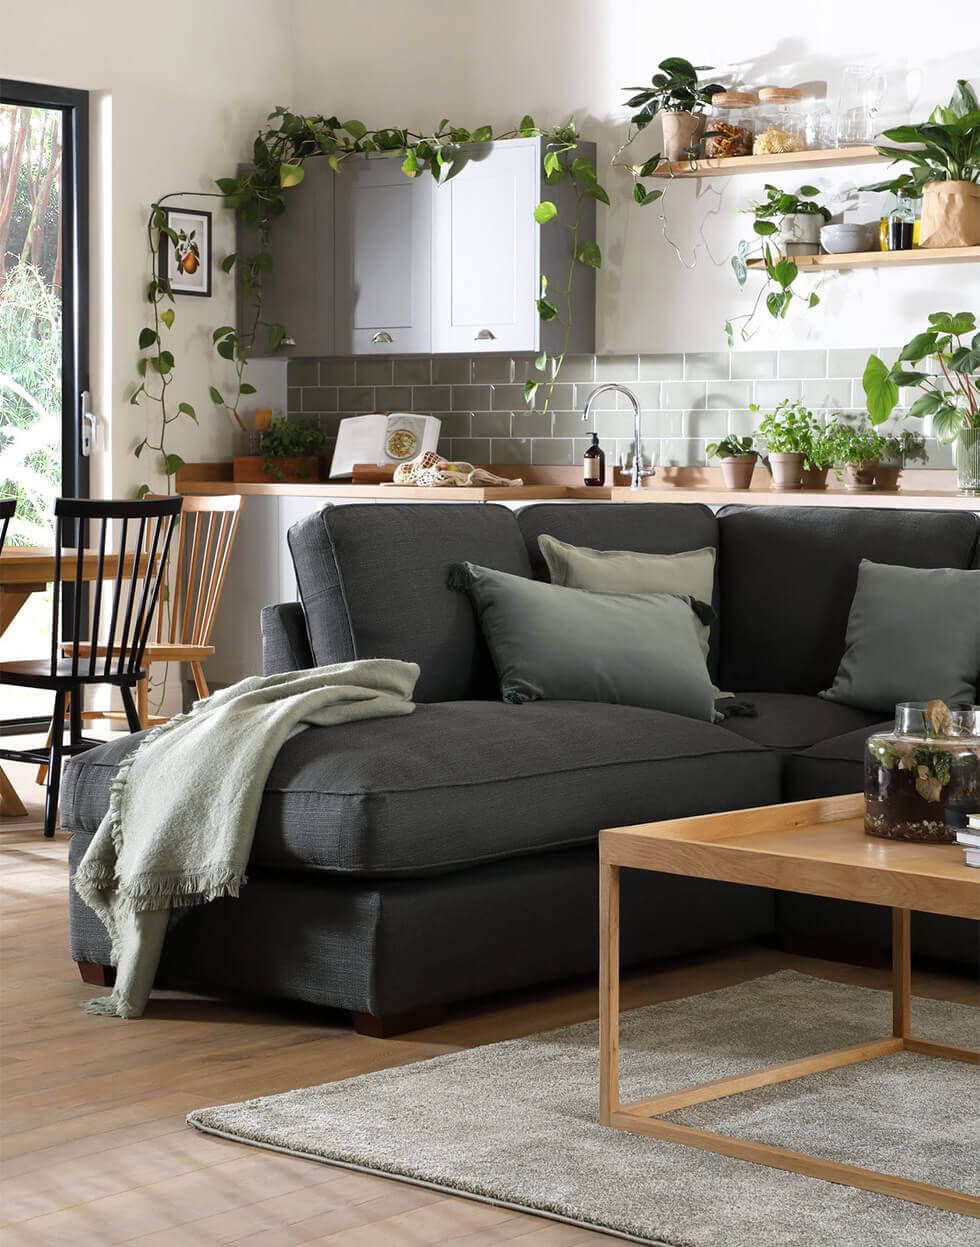 Scandi living room with lots of plants and cosy sofa